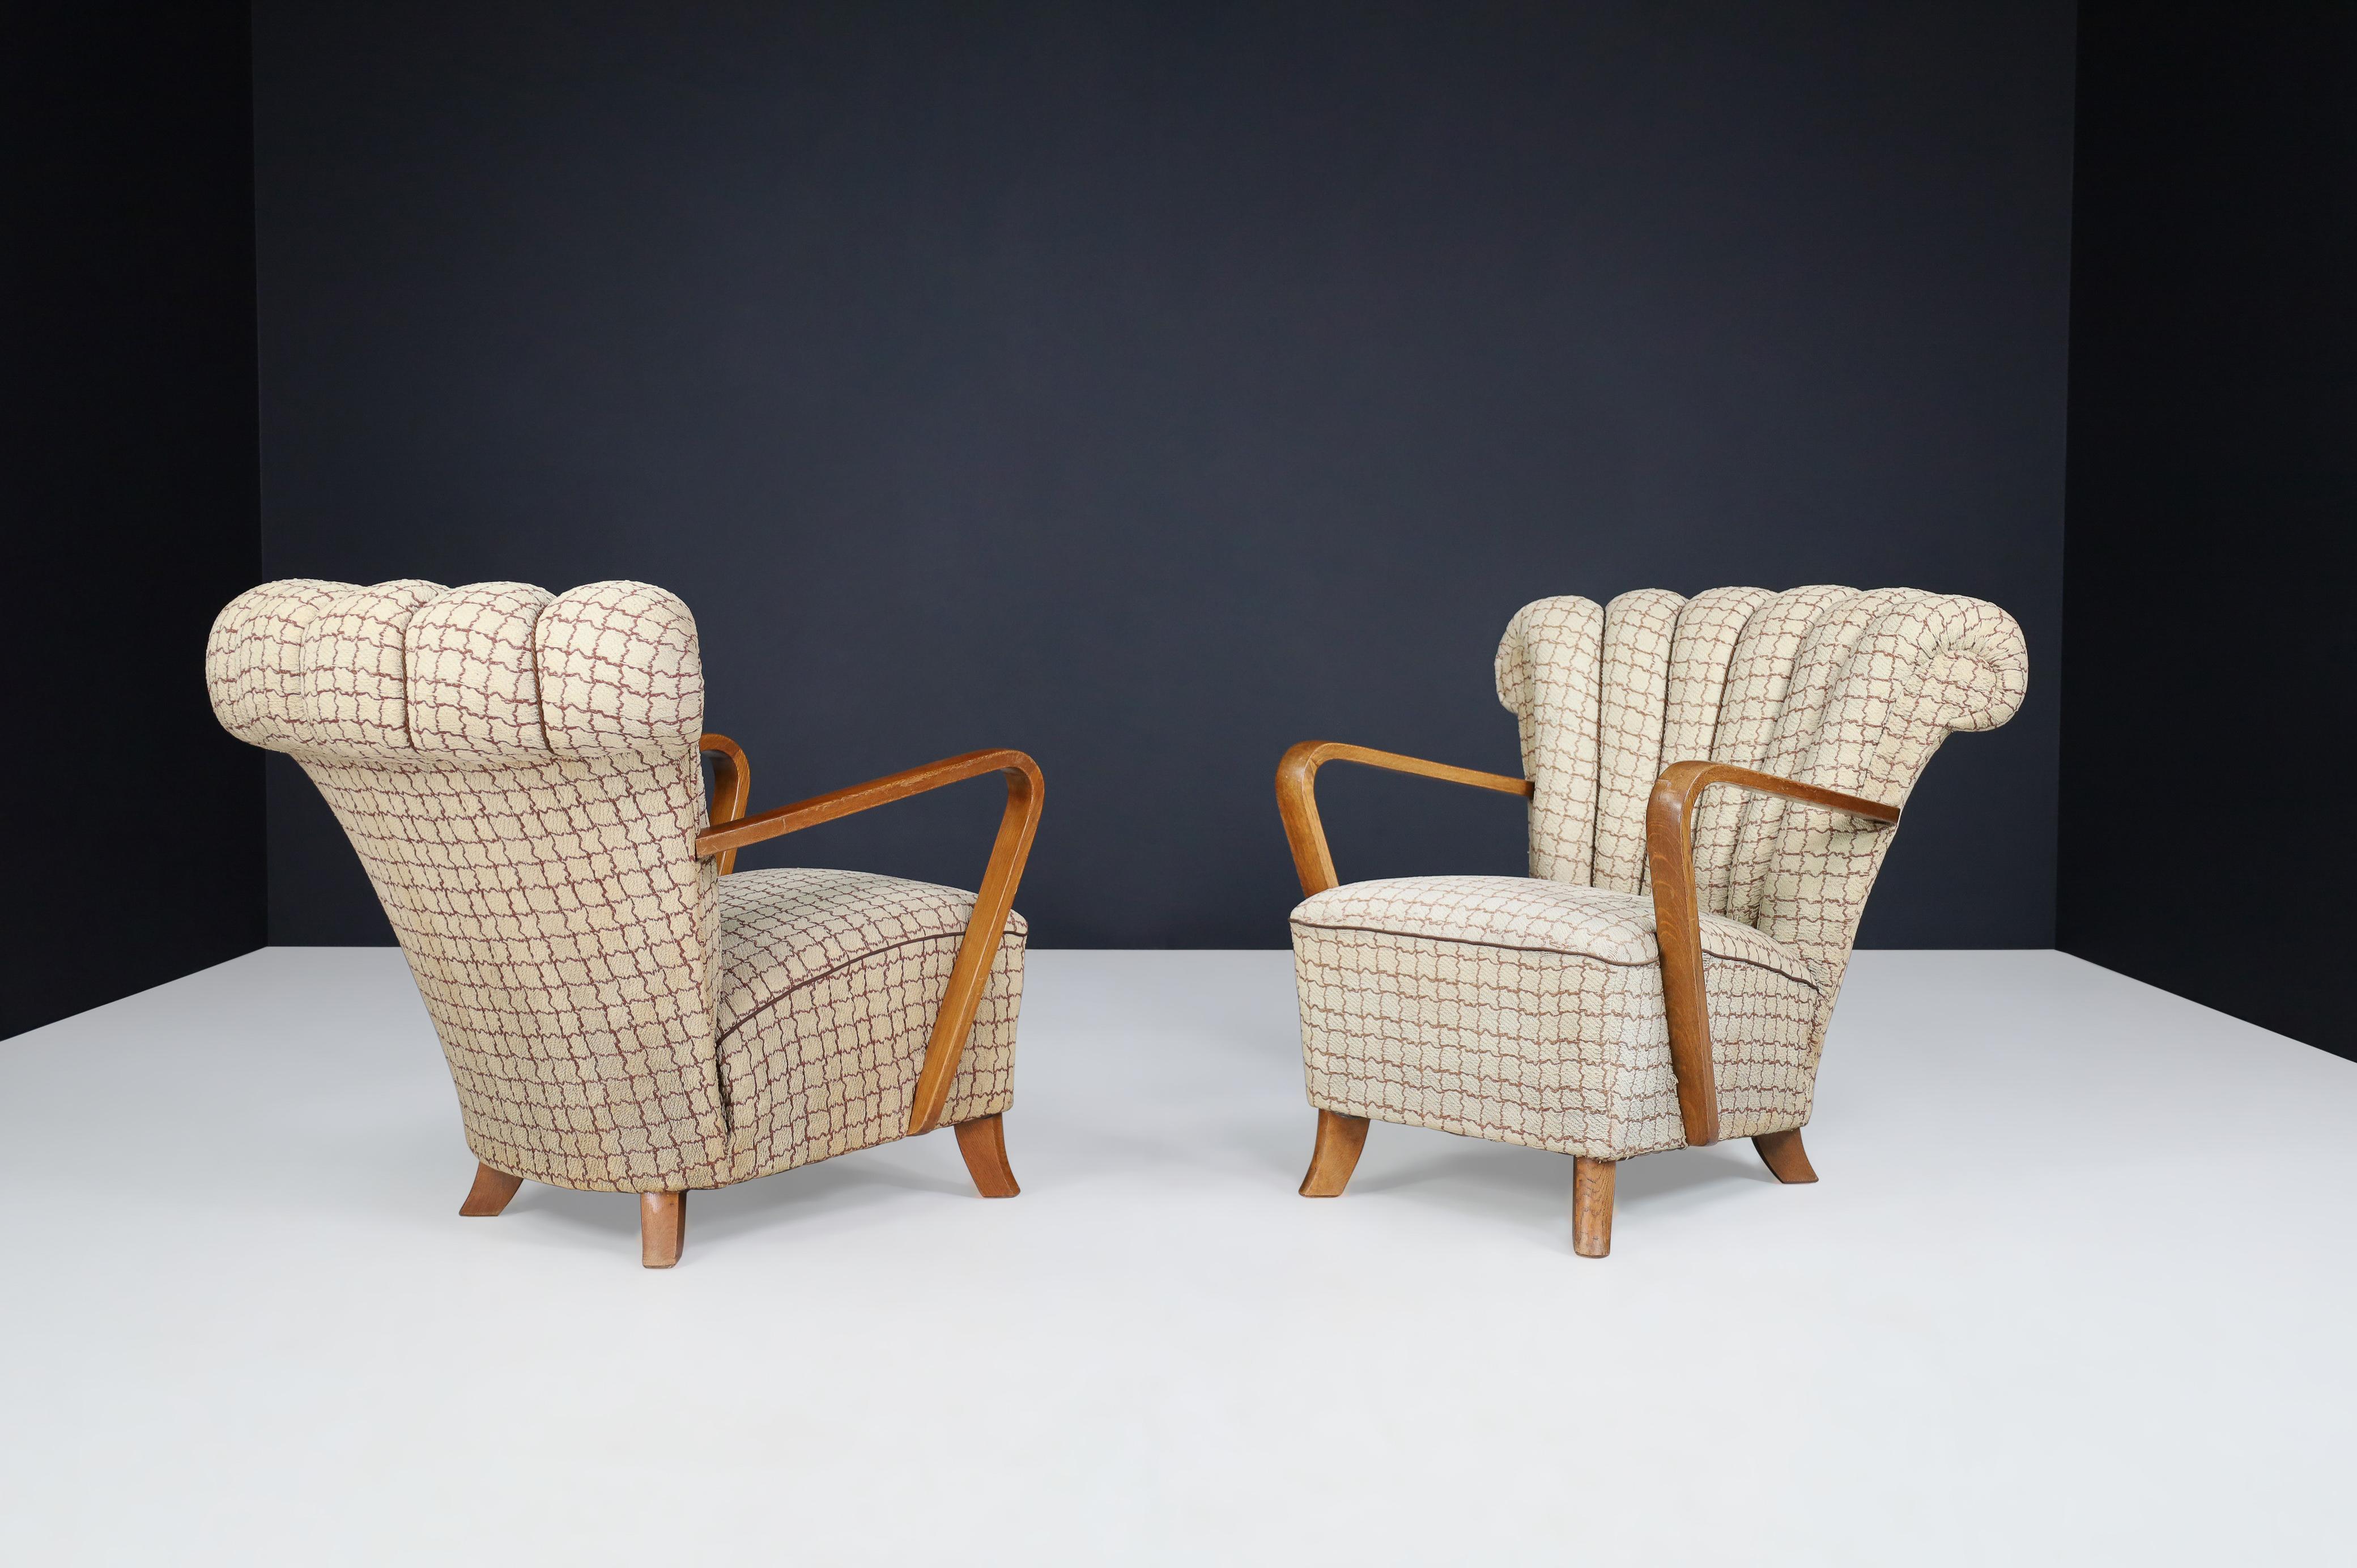 Art Deco Fan-Shaped Armchairs in Bentwood and Original Upholstery, Praque, 1930s For Sale 4